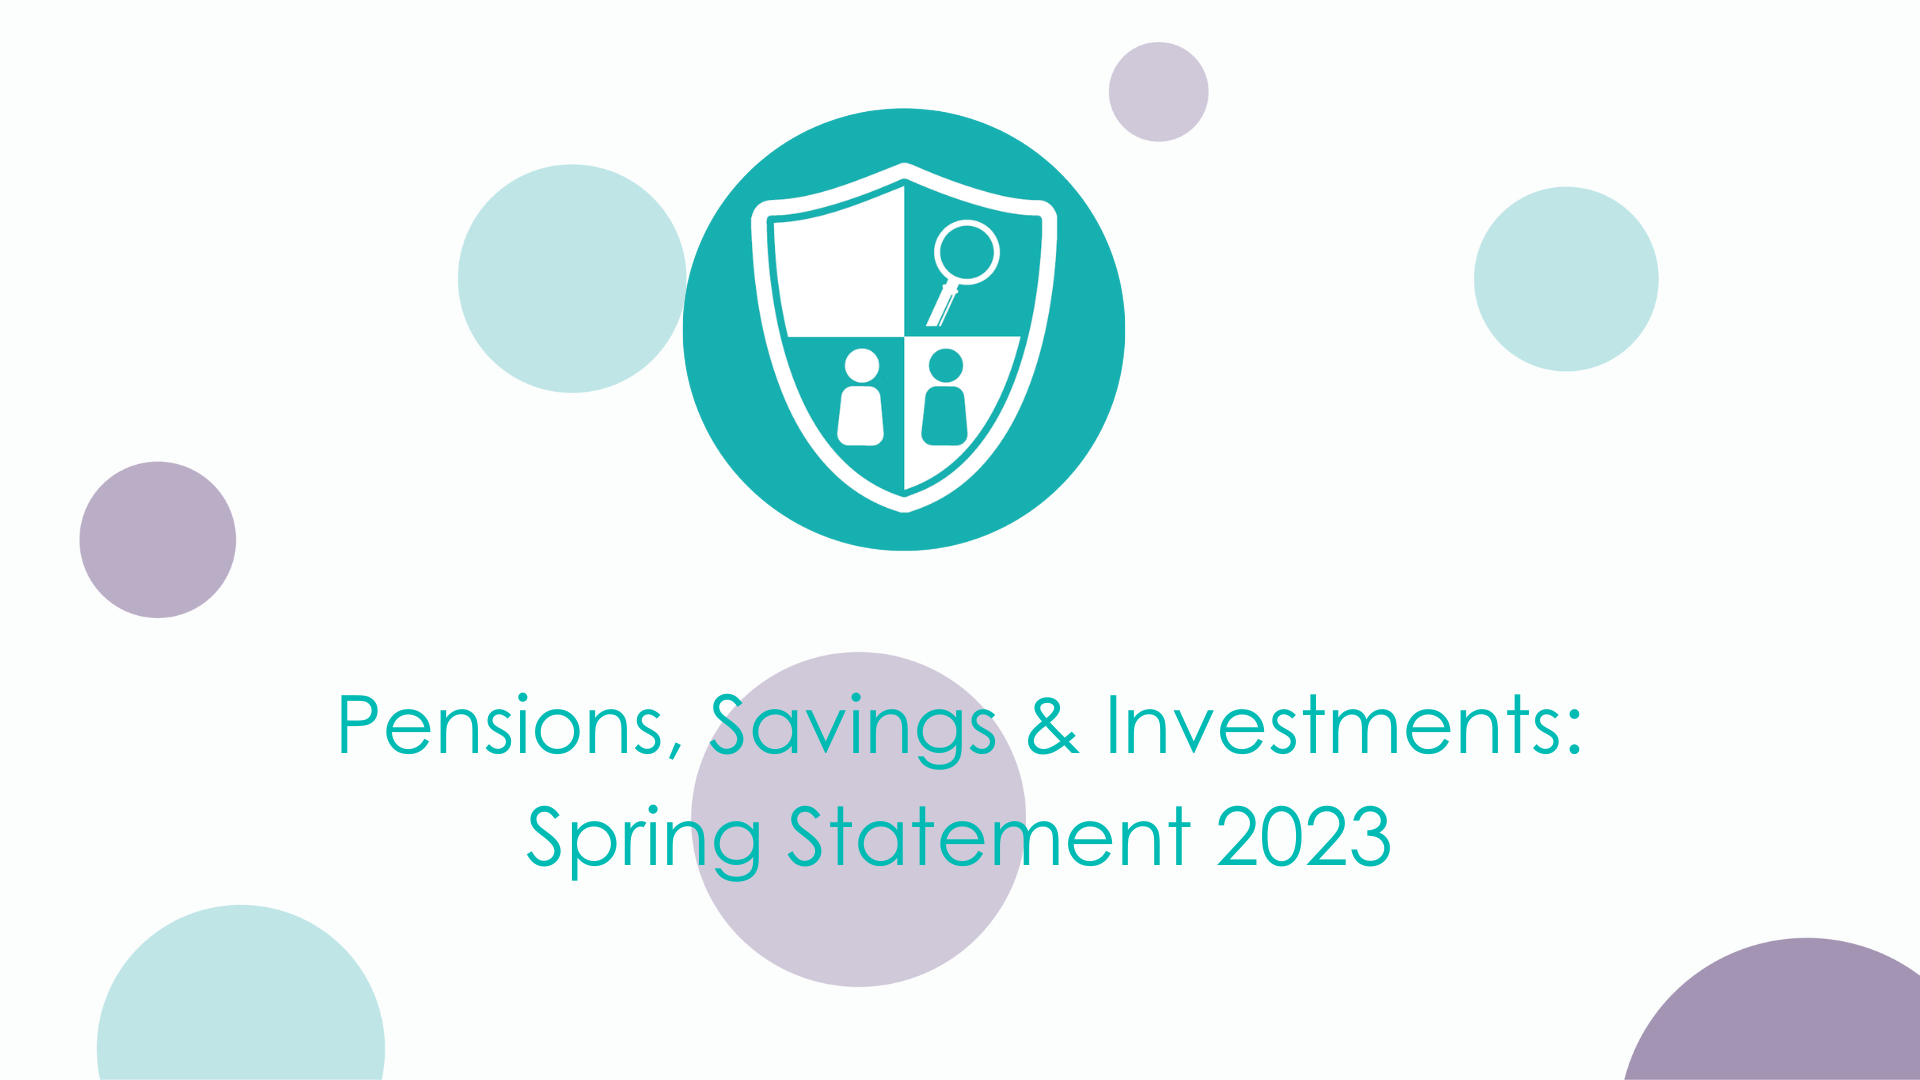 Spring Statement 2023: Pensions, Savings & Investments